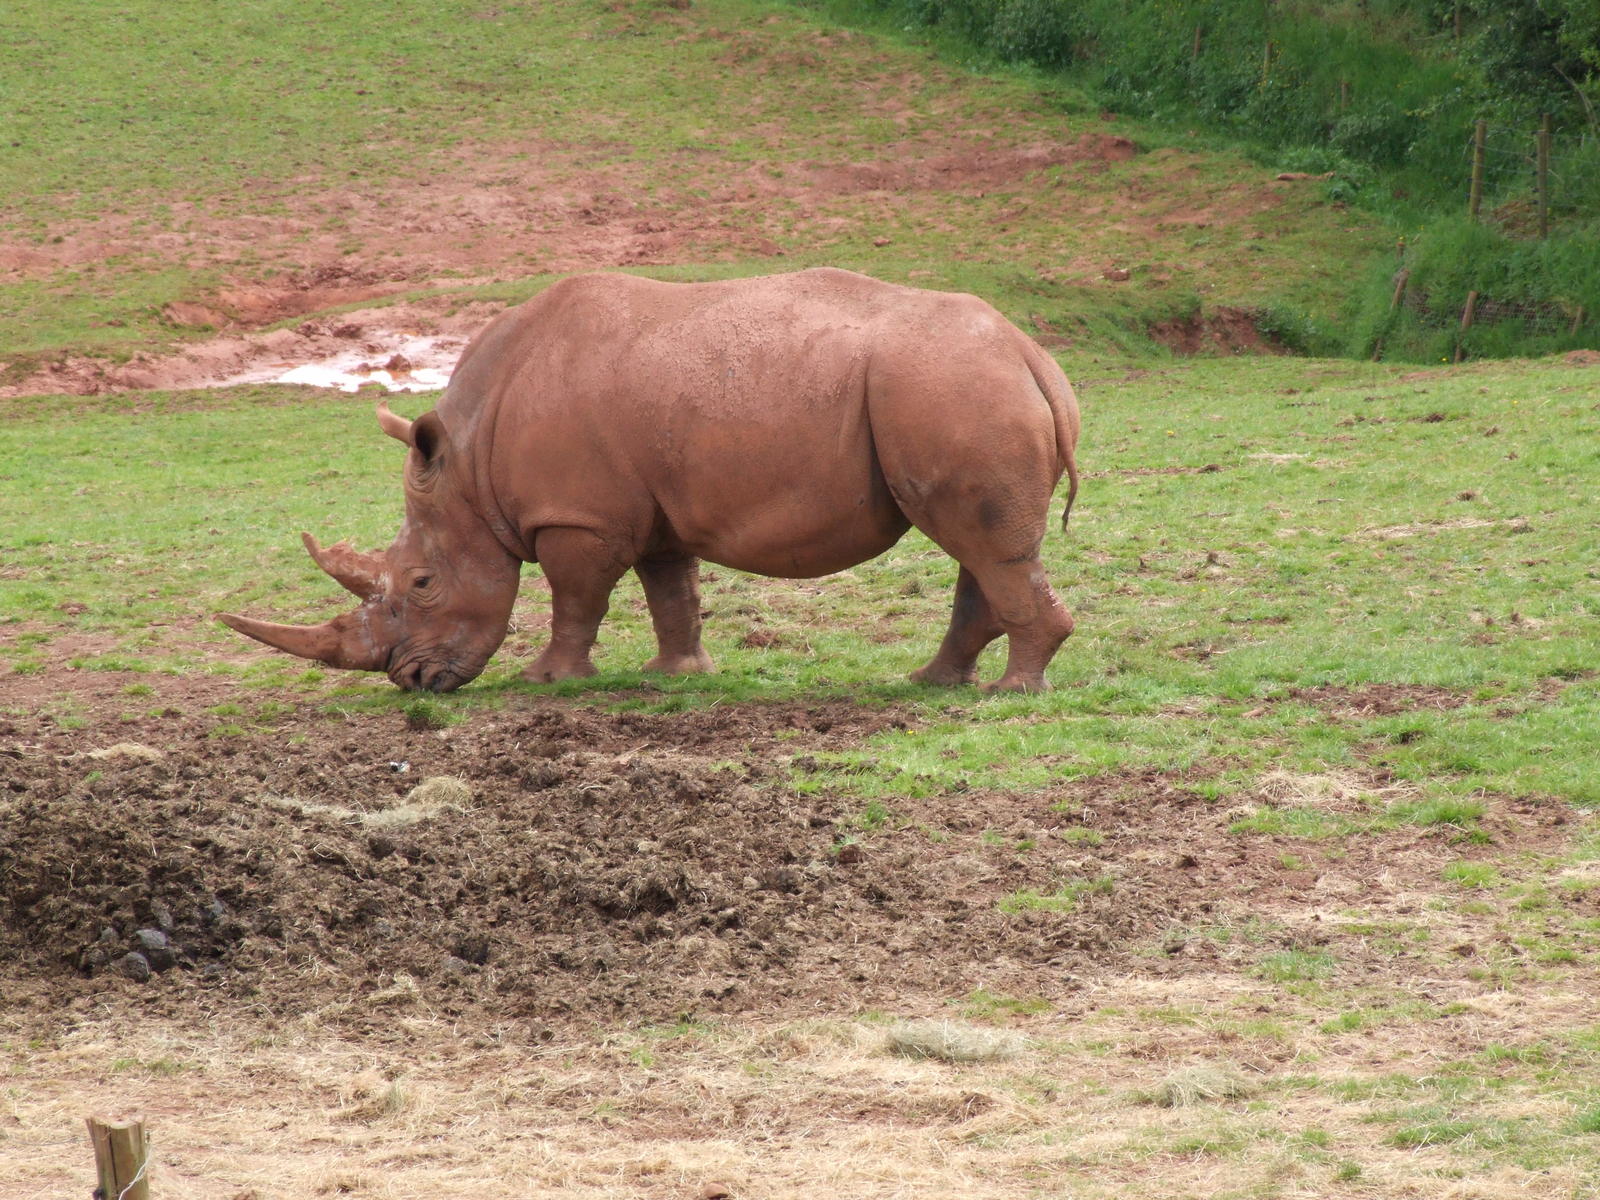 a rhino that is standing on some grass